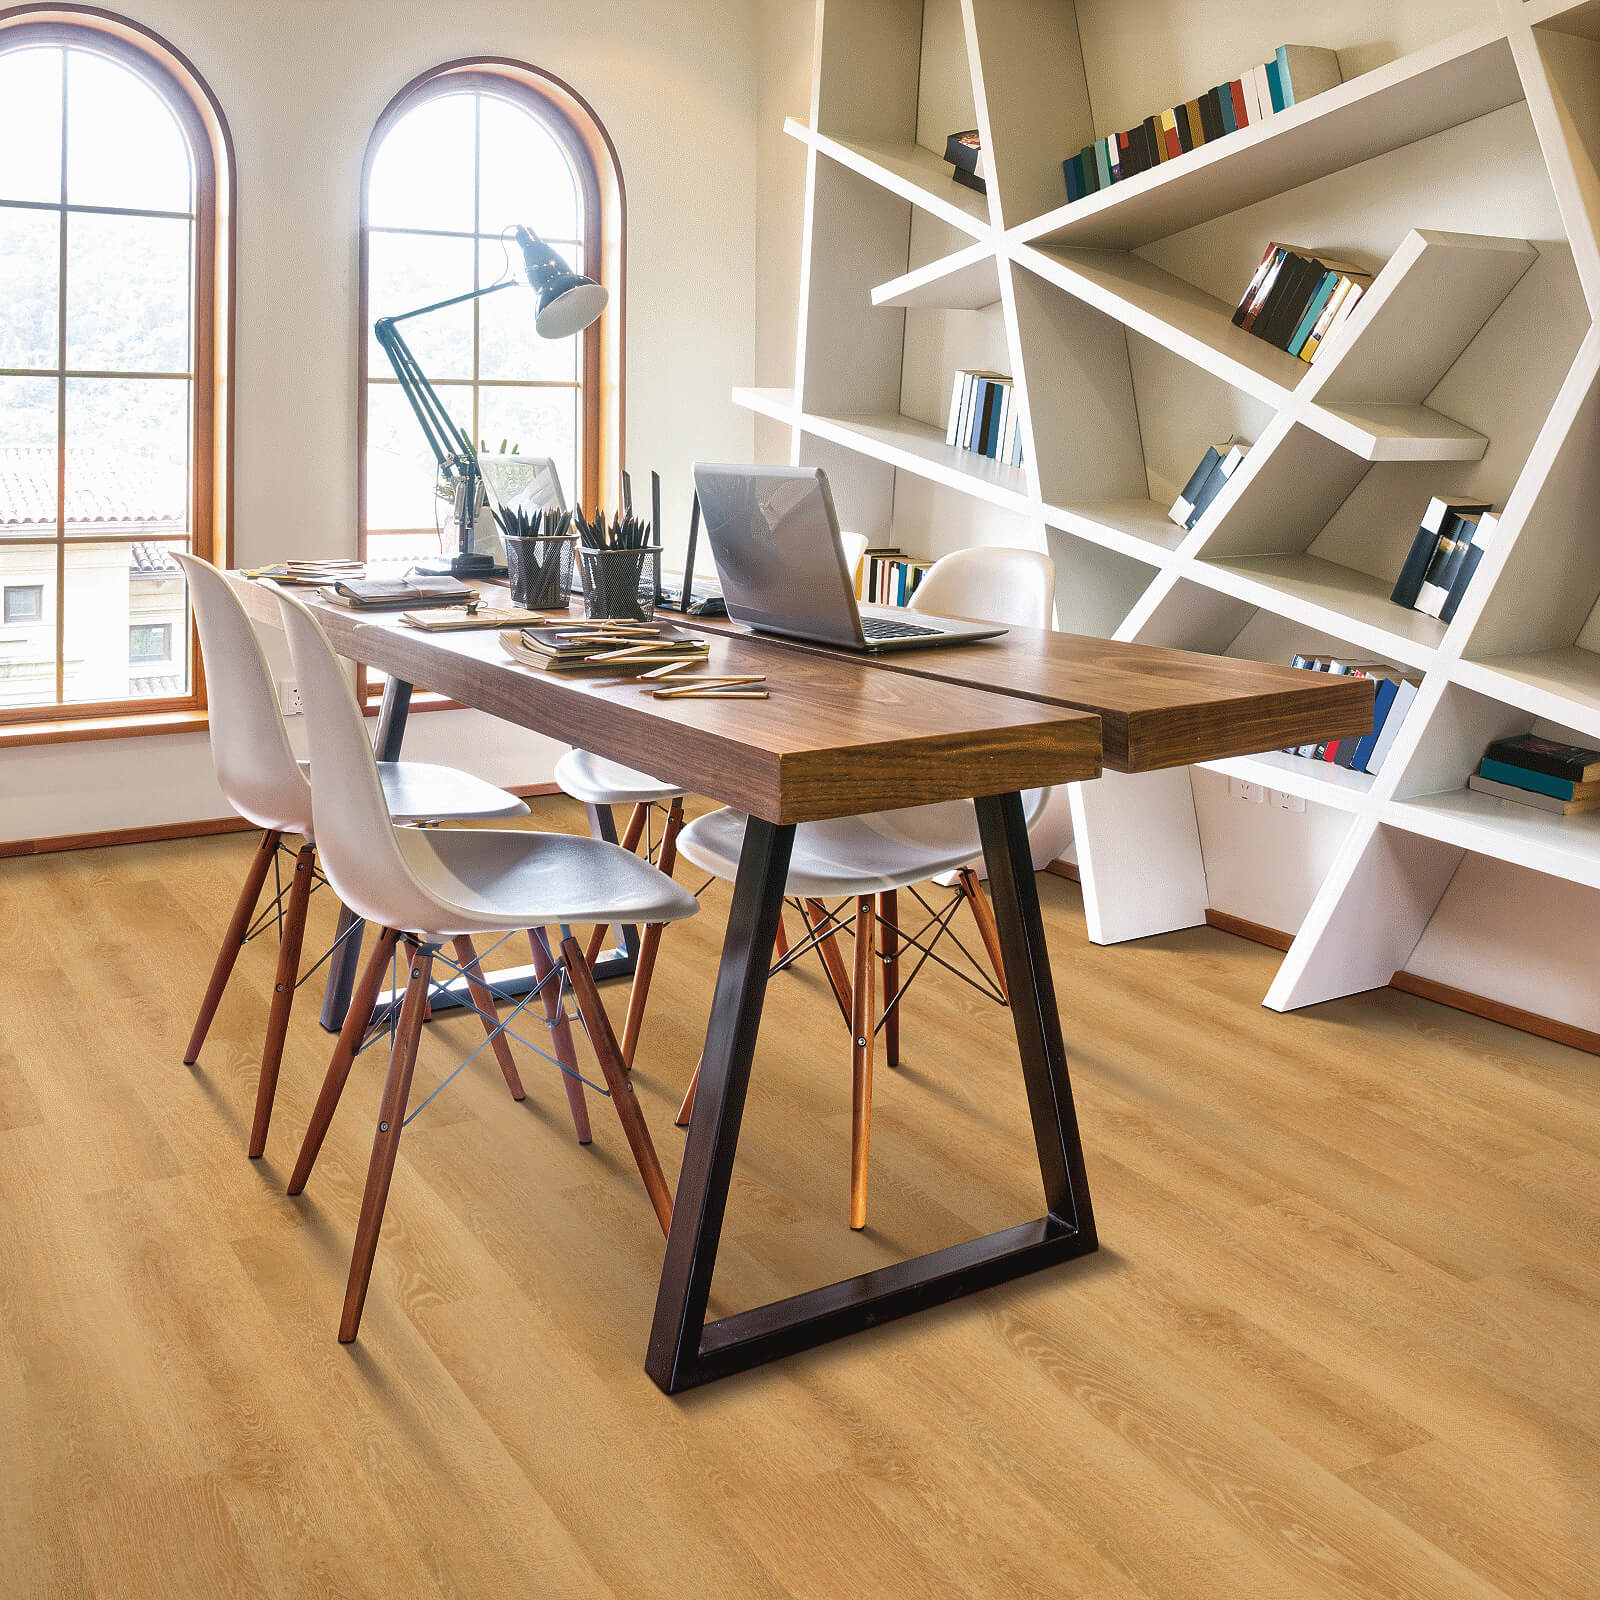 Vinyl flooring for study room | Rugs Rolls and More